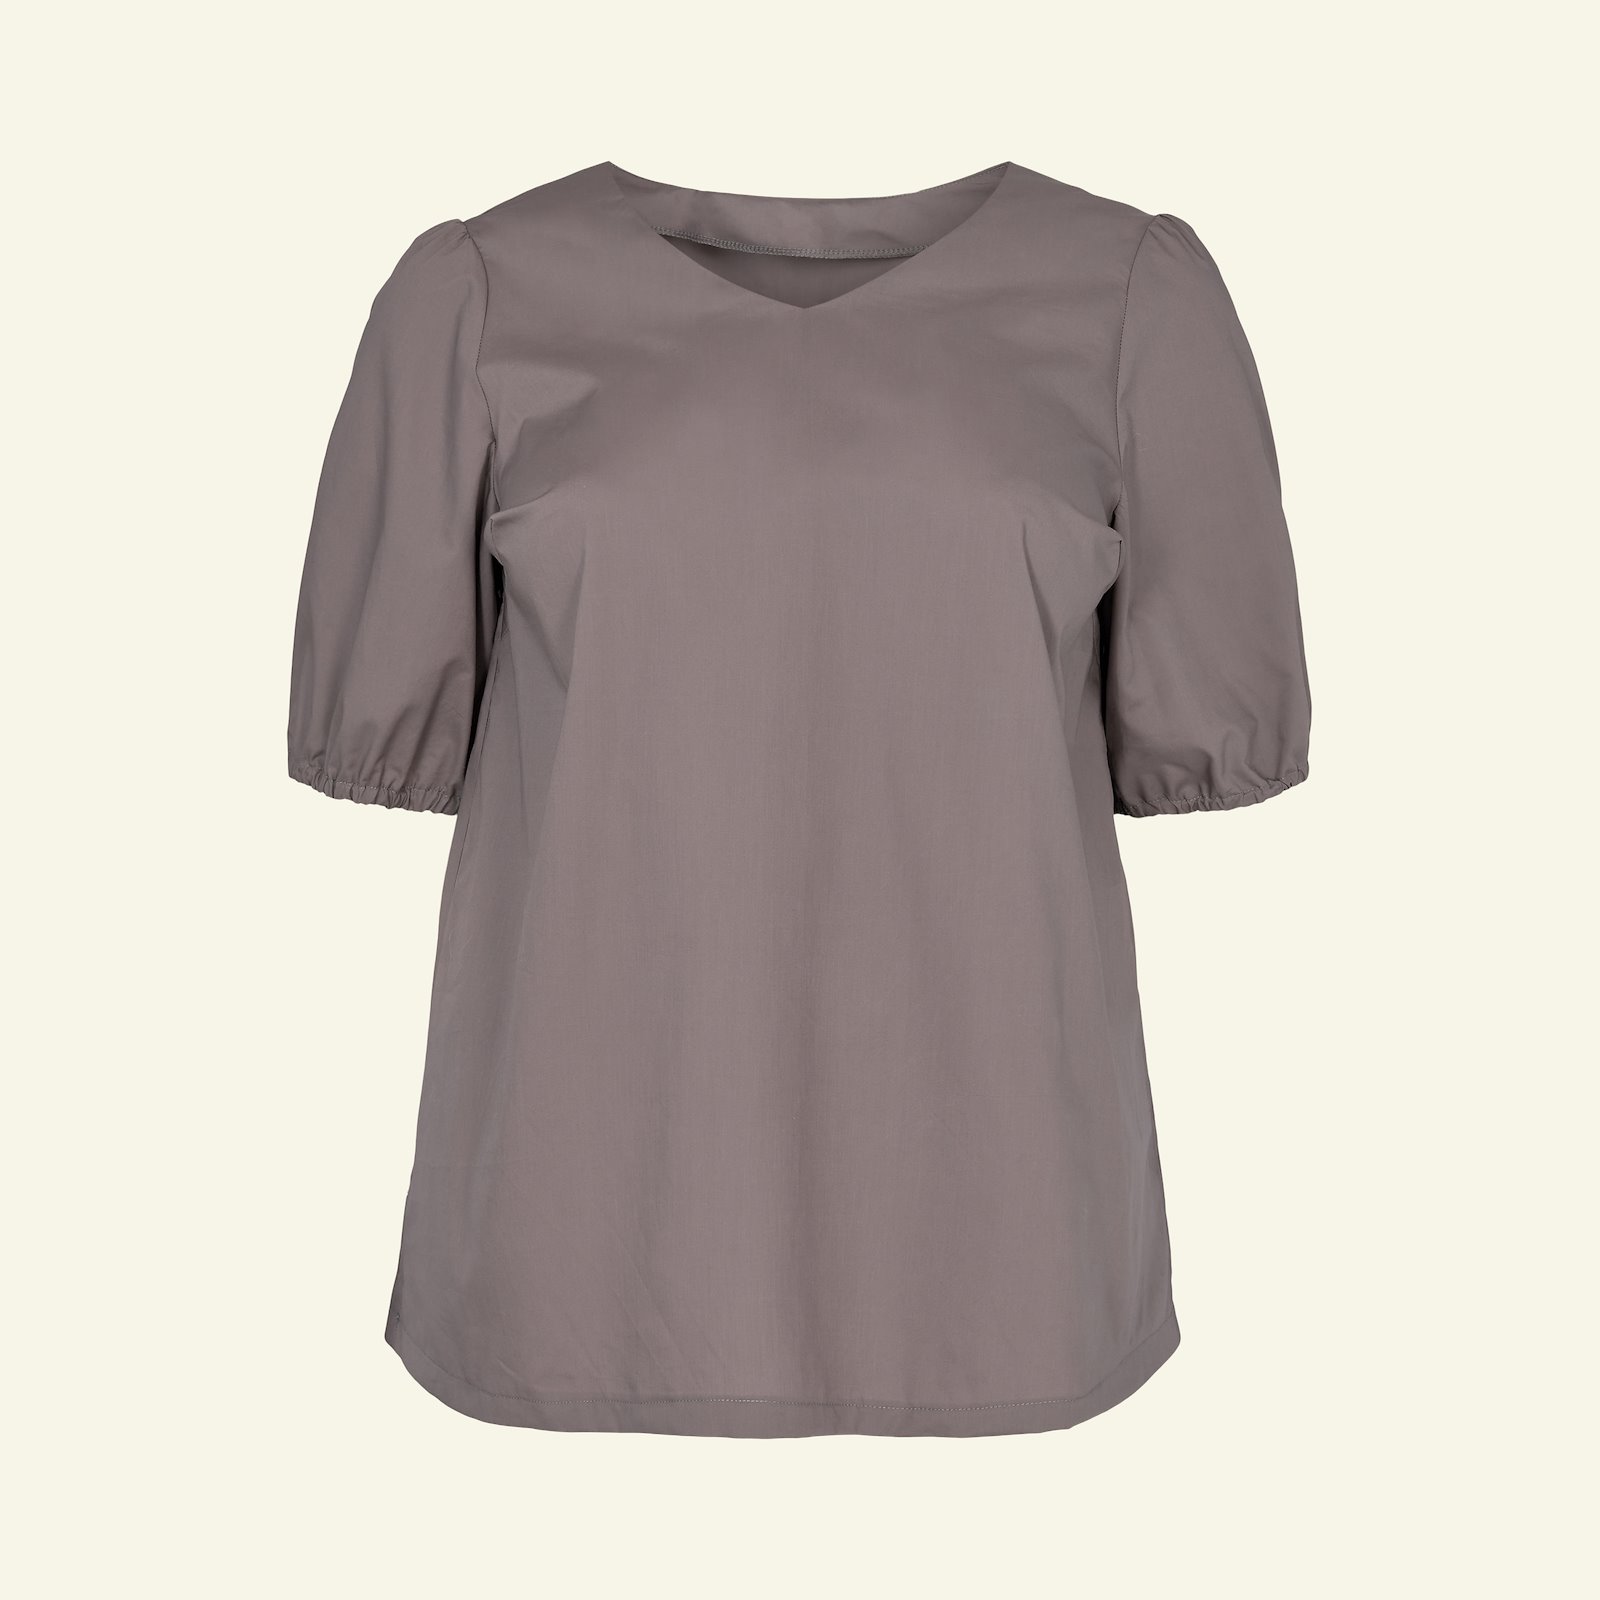 Blouse with long and short sleeve, 46/18 p72006_540121_sskit